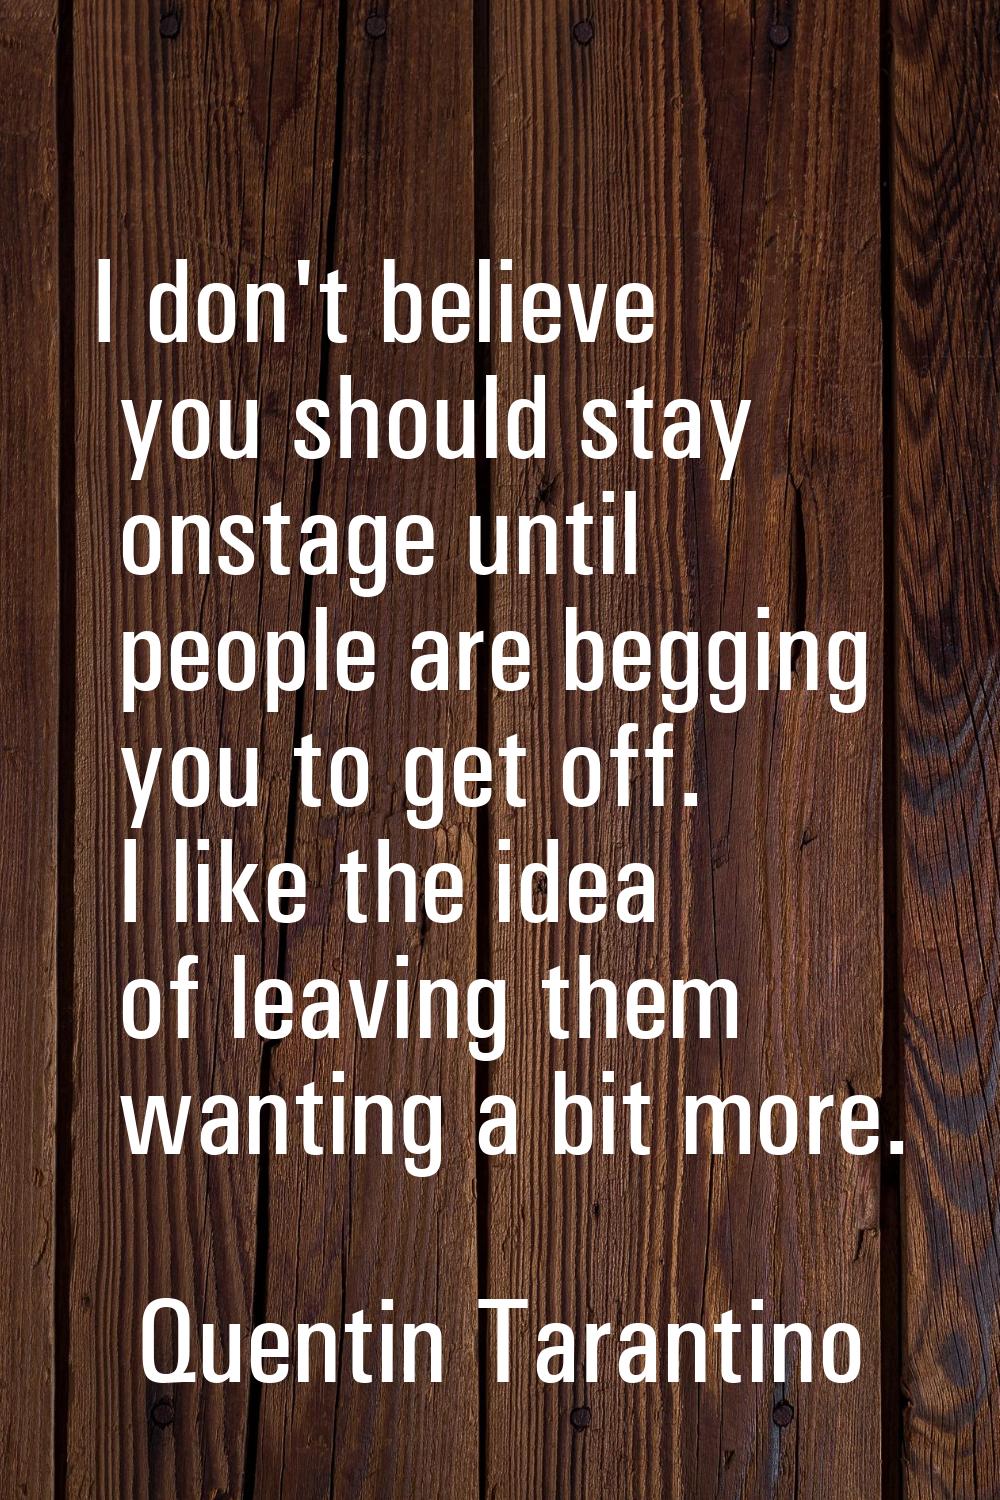 I don't believe you should stay onstage until people are begging you to get off. I like the idea of